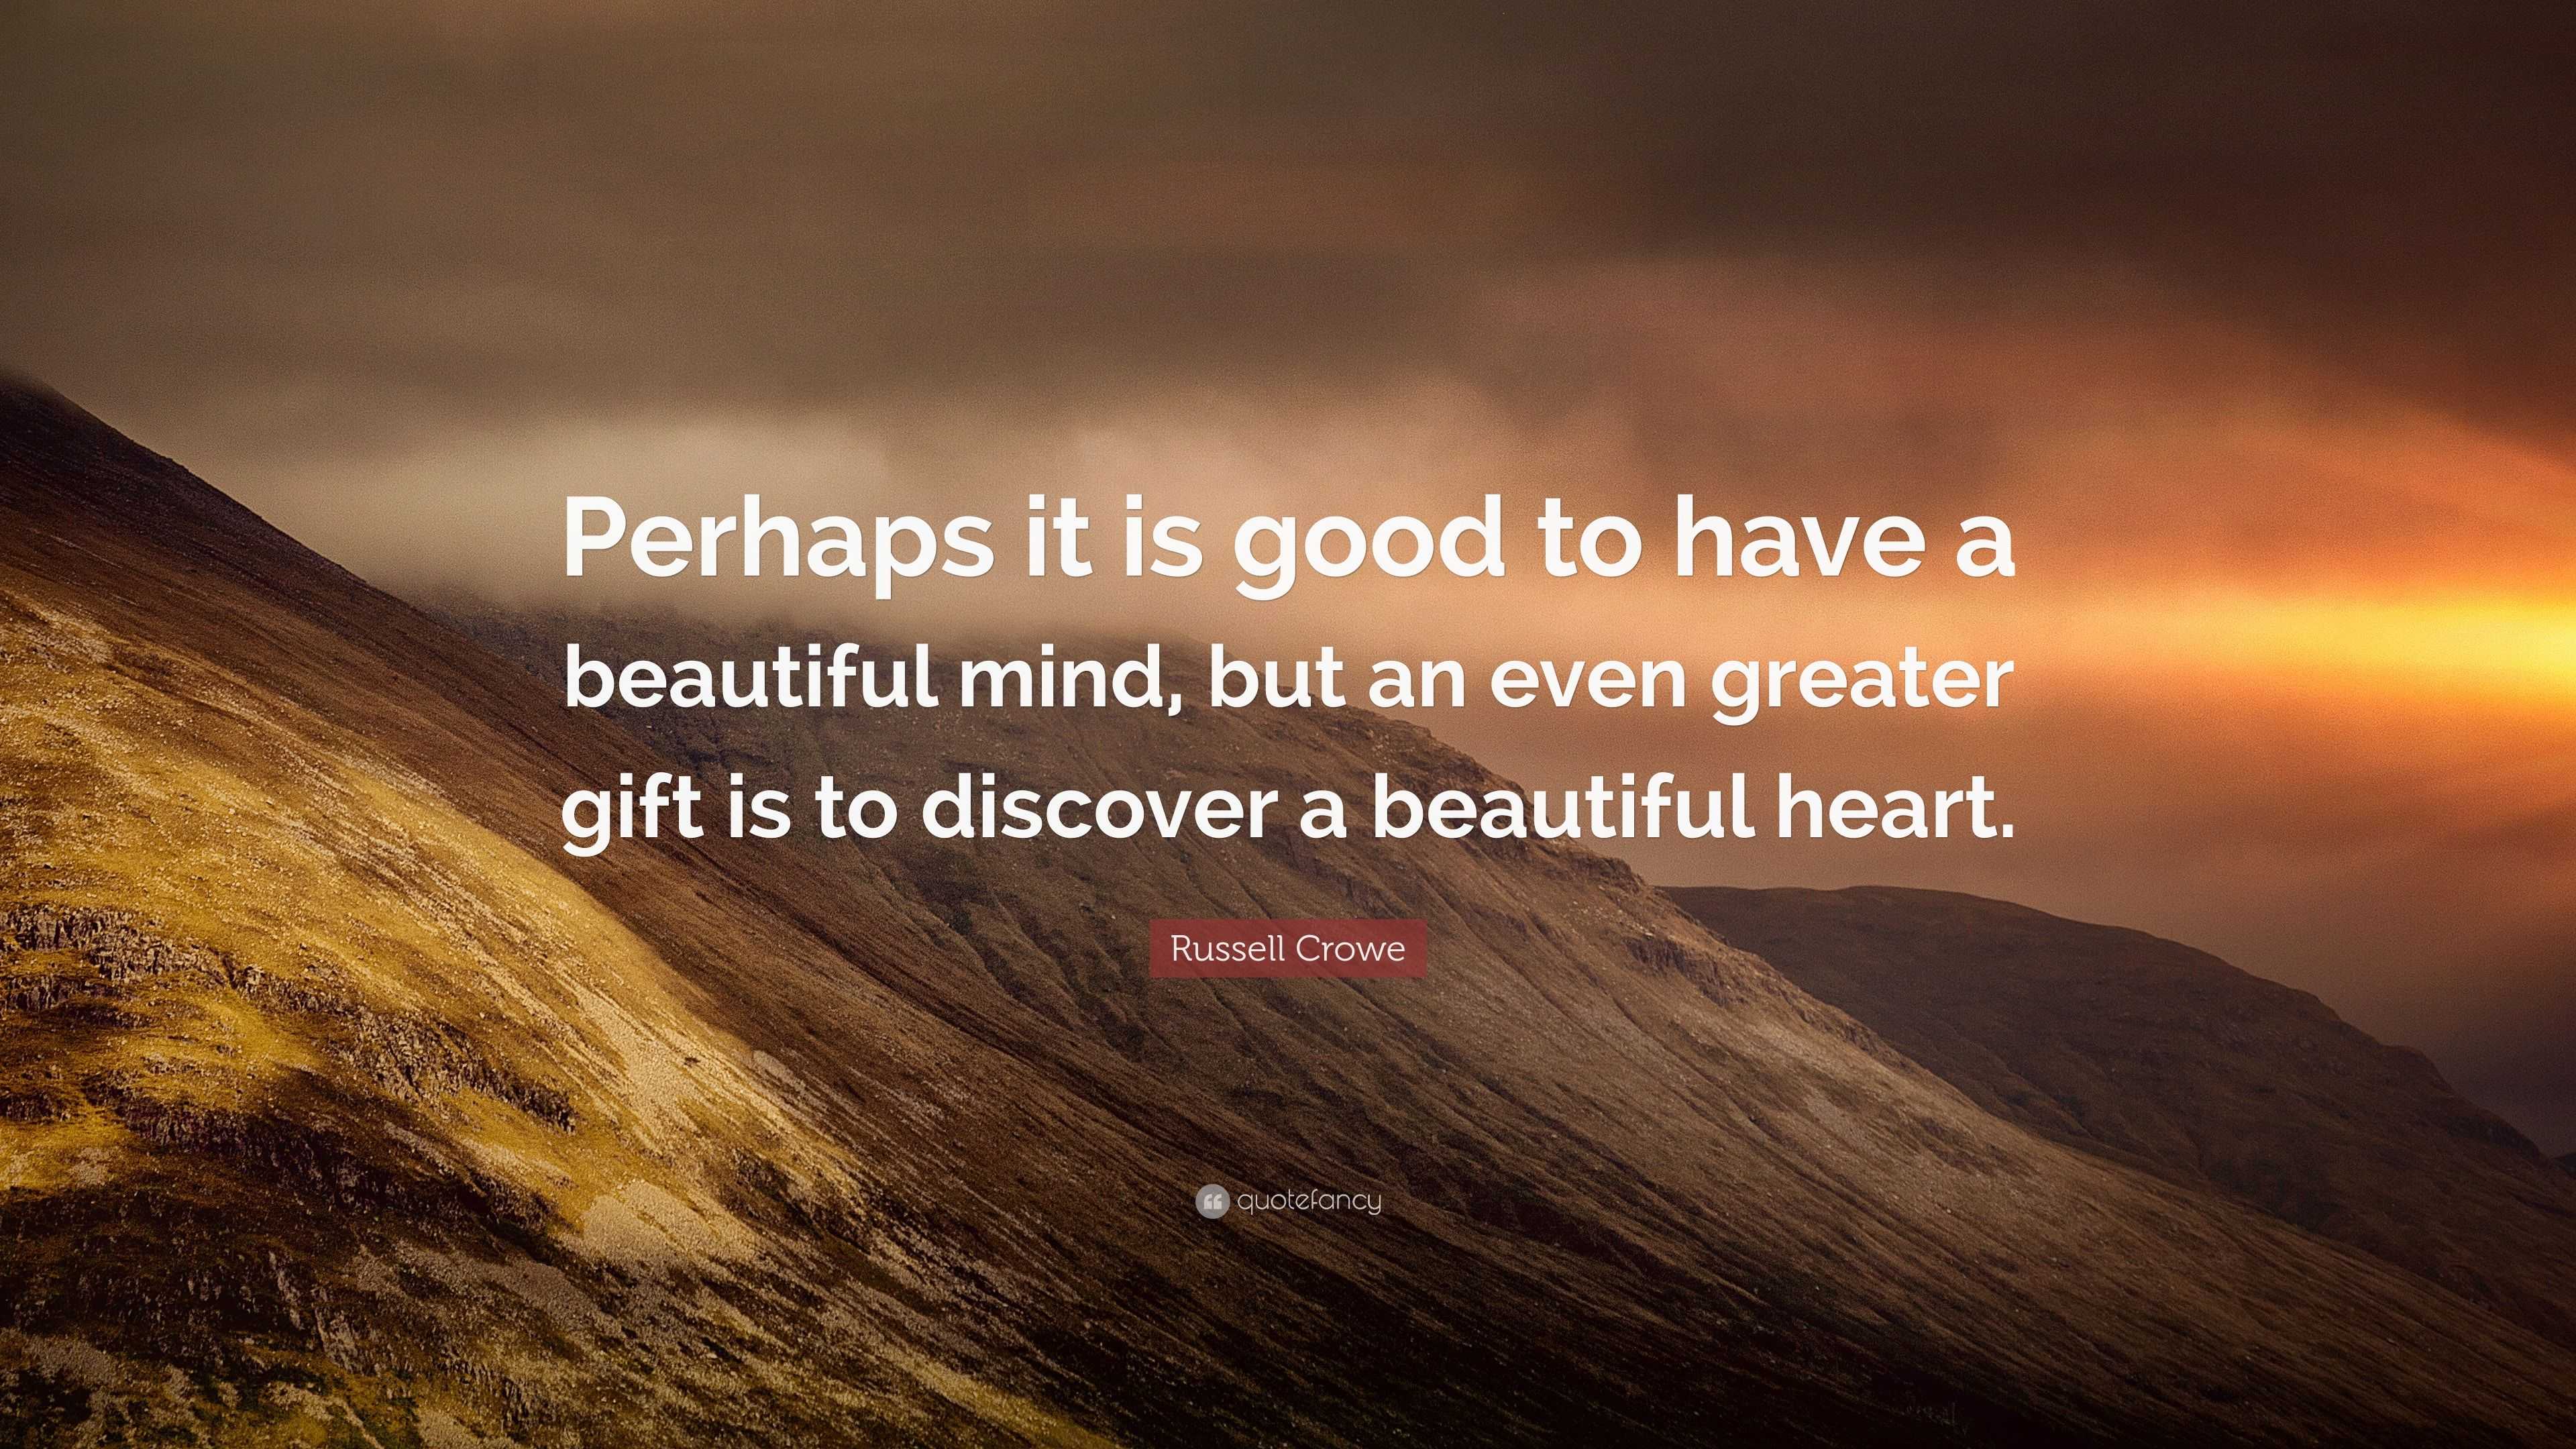 Russell Crowe Quote: “Perhaps it is good to have a beautiful mind, but ...